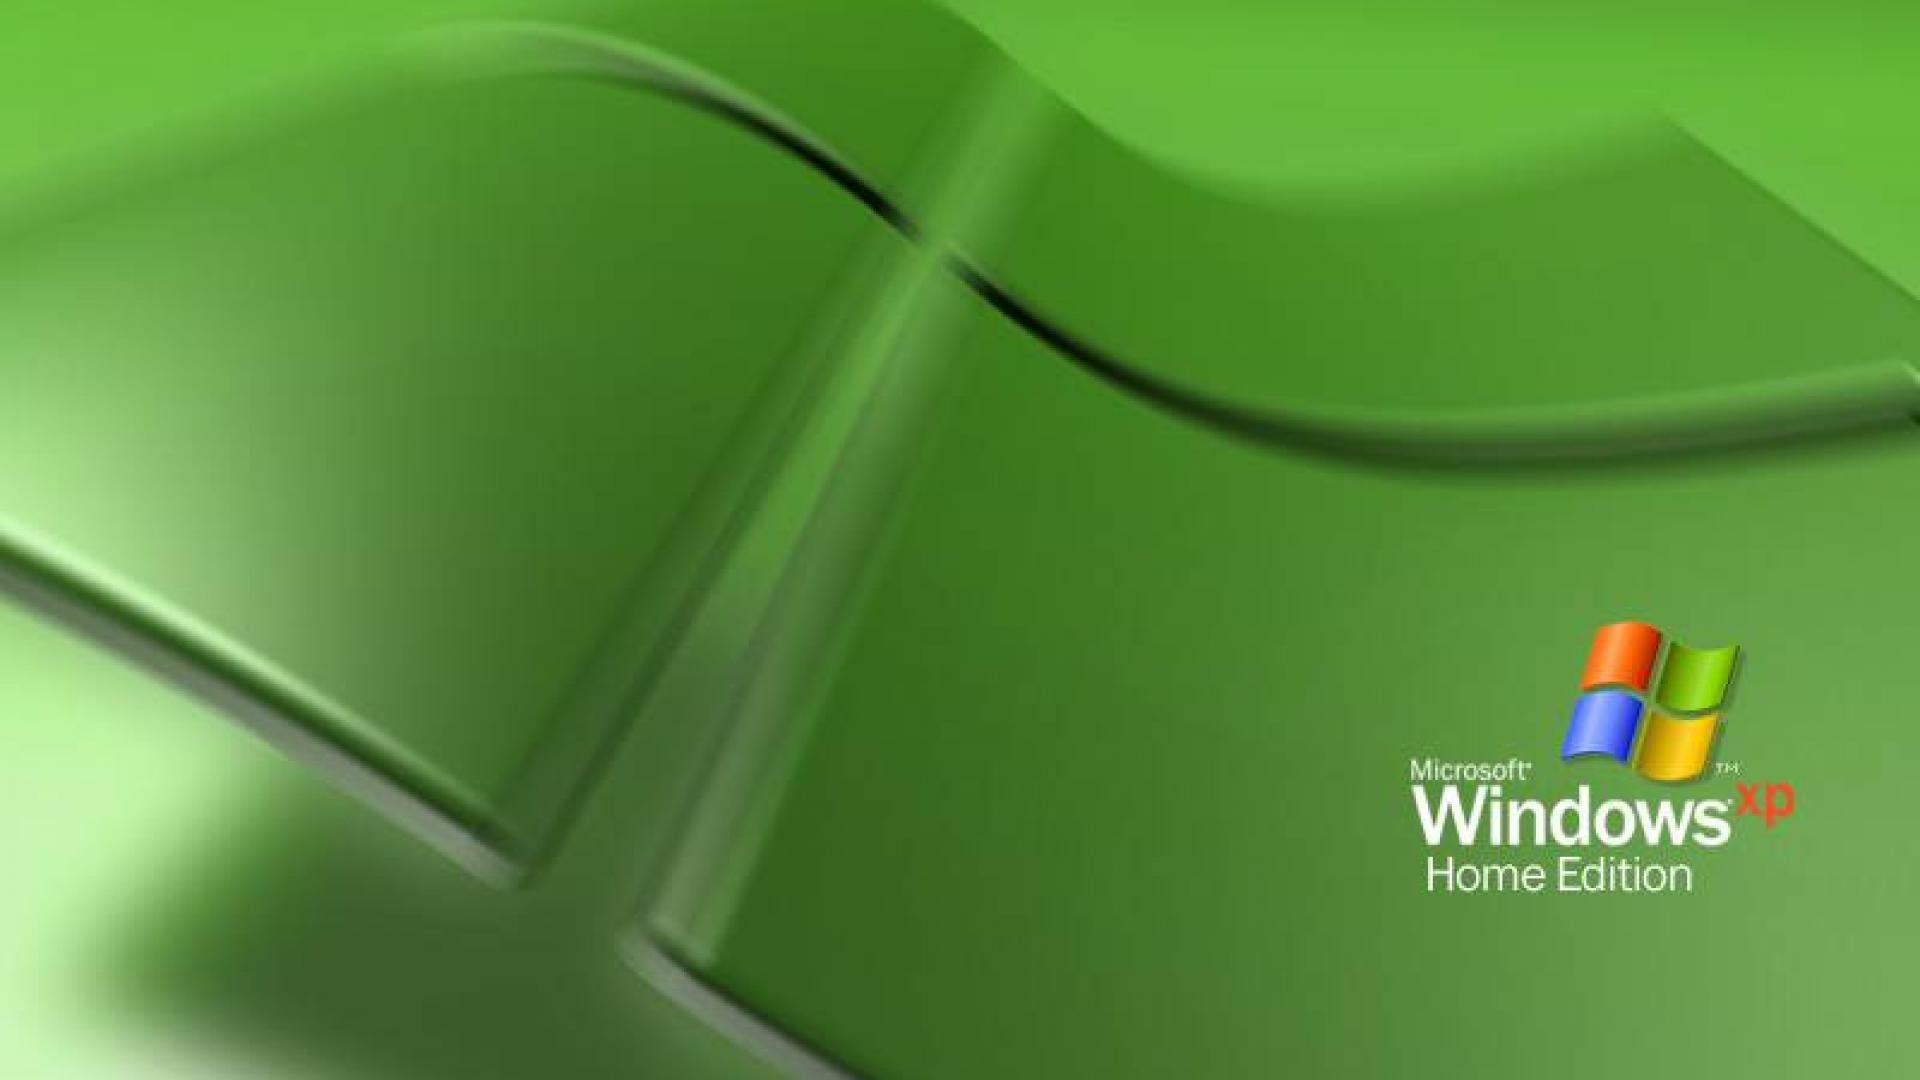 Windows xp wallpaper 2 - - High Quality and Resolution